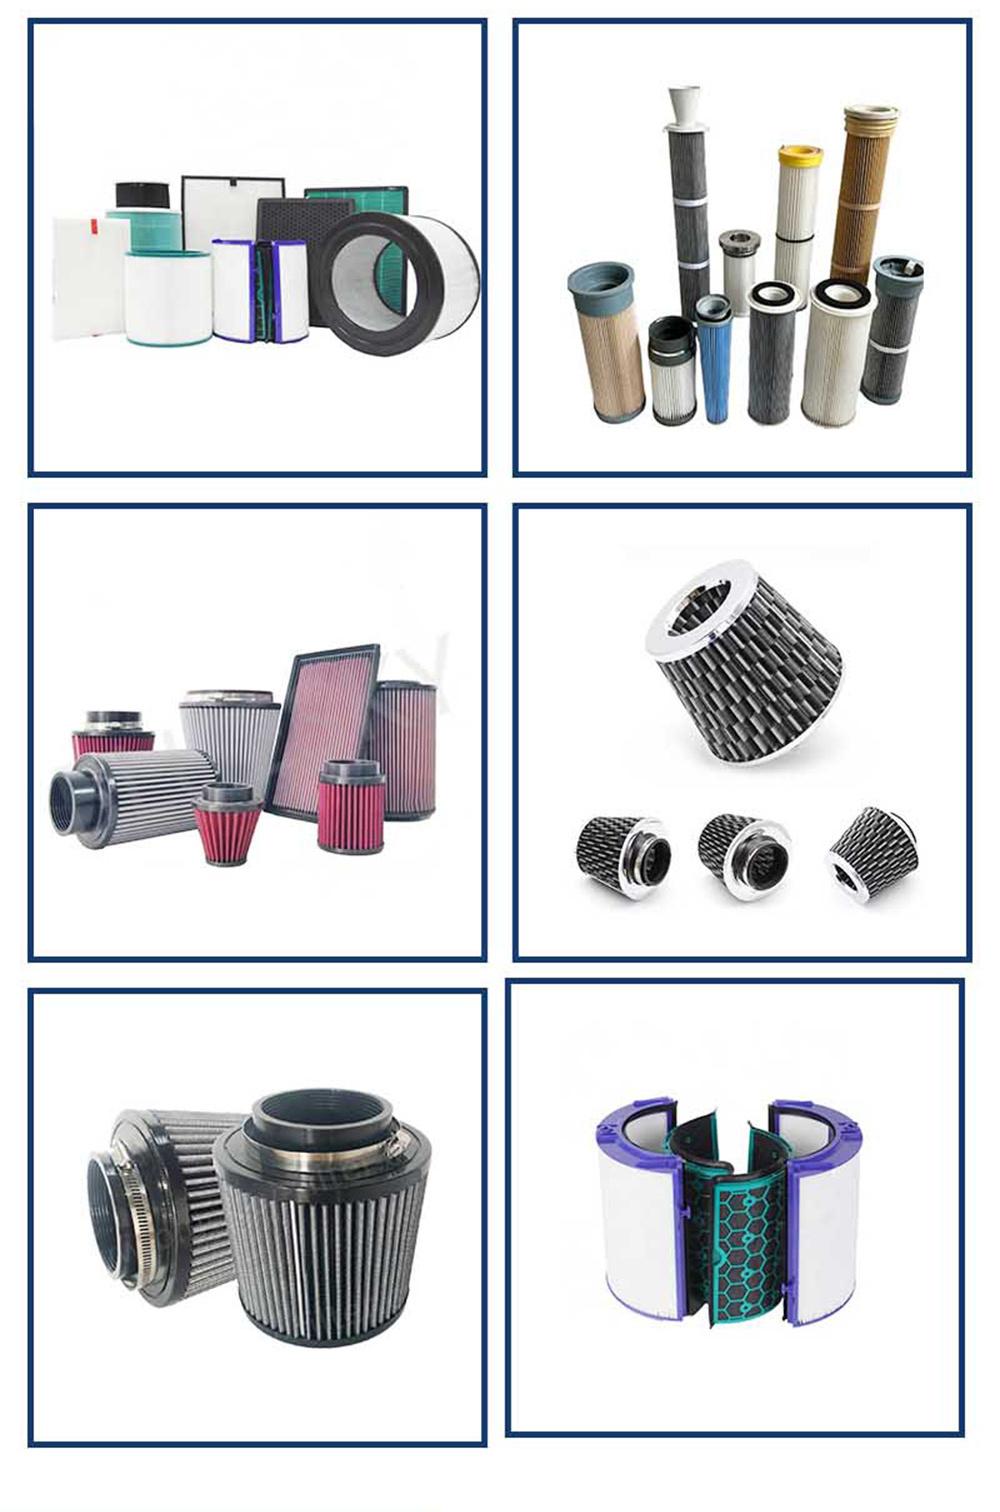 China Oil Filter Manufacturer Wholesale Auto Parts Engine Car Oil Filter